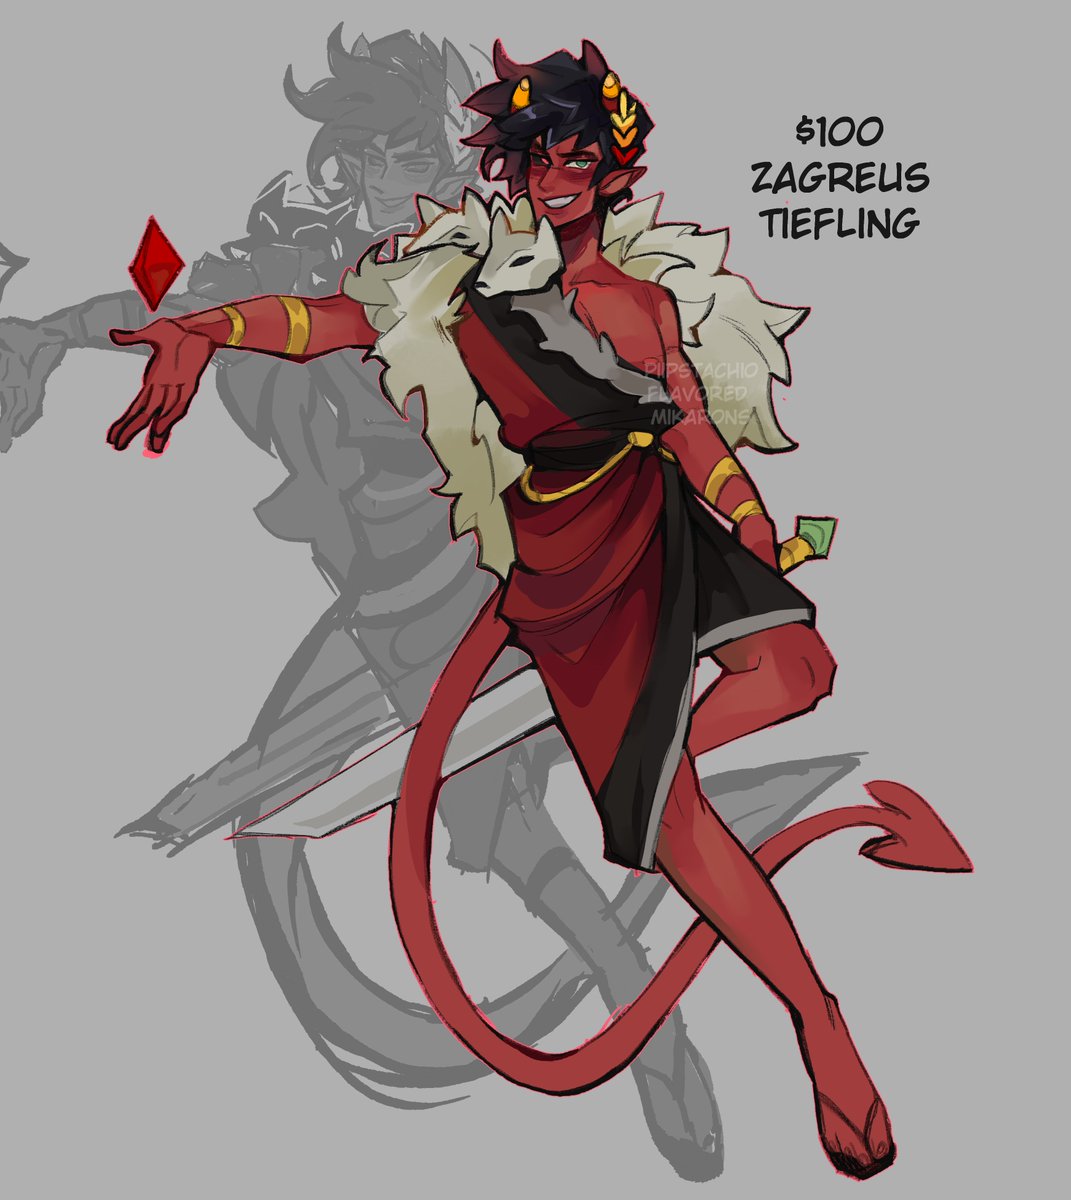 「Zagreus tiefling adopt/adoptable is now 」|LUCI @ DnD Brainrotのイラスト